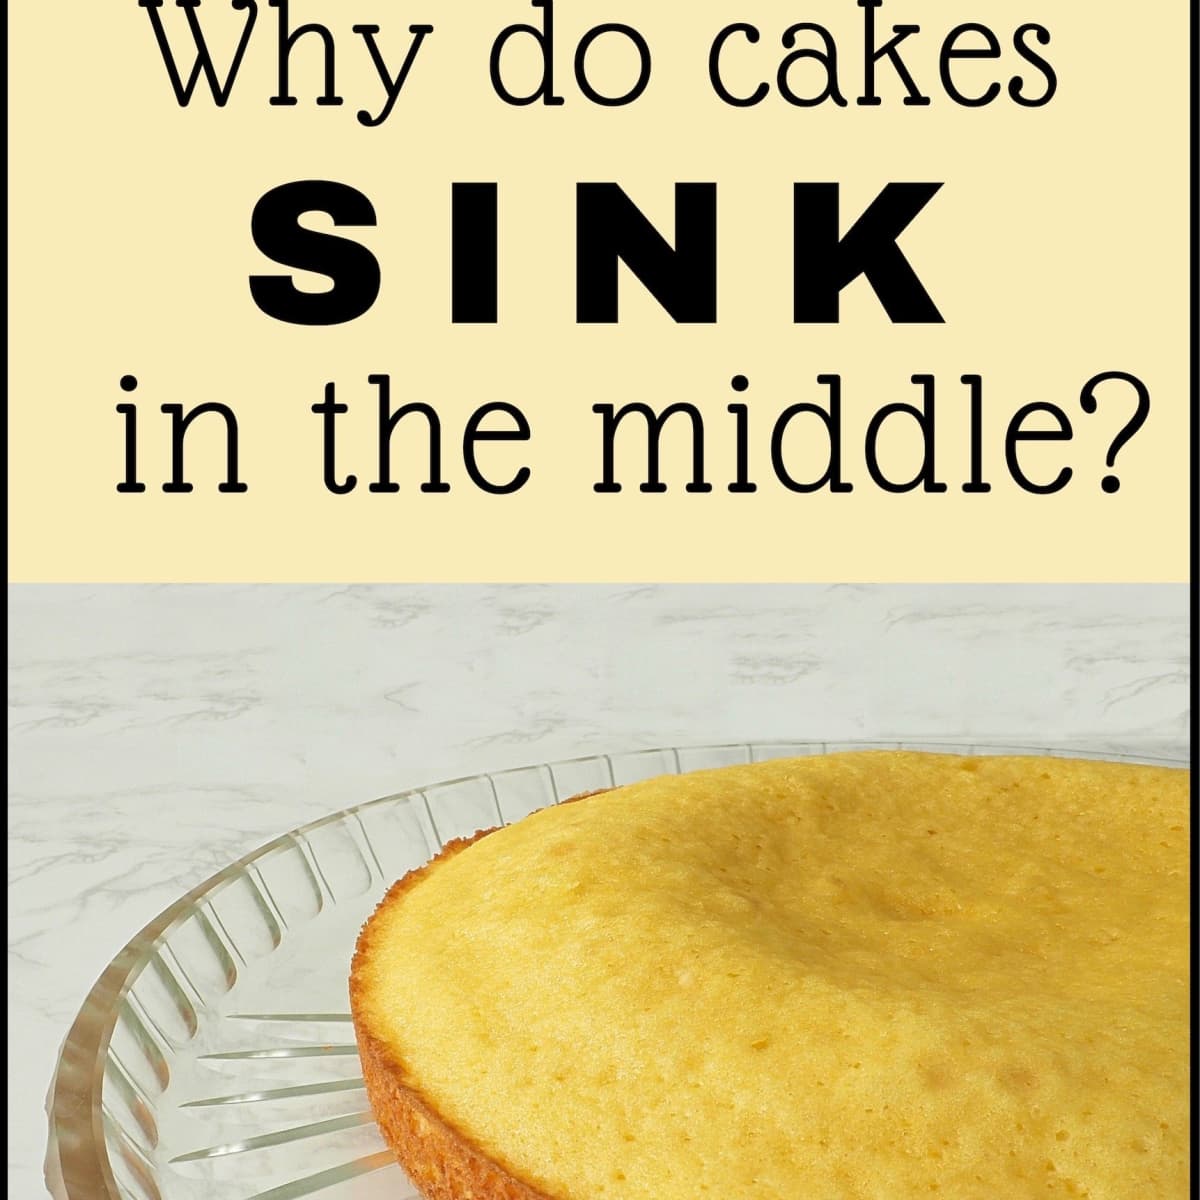 7 Ways to Keep a Cake From Falling After Baking